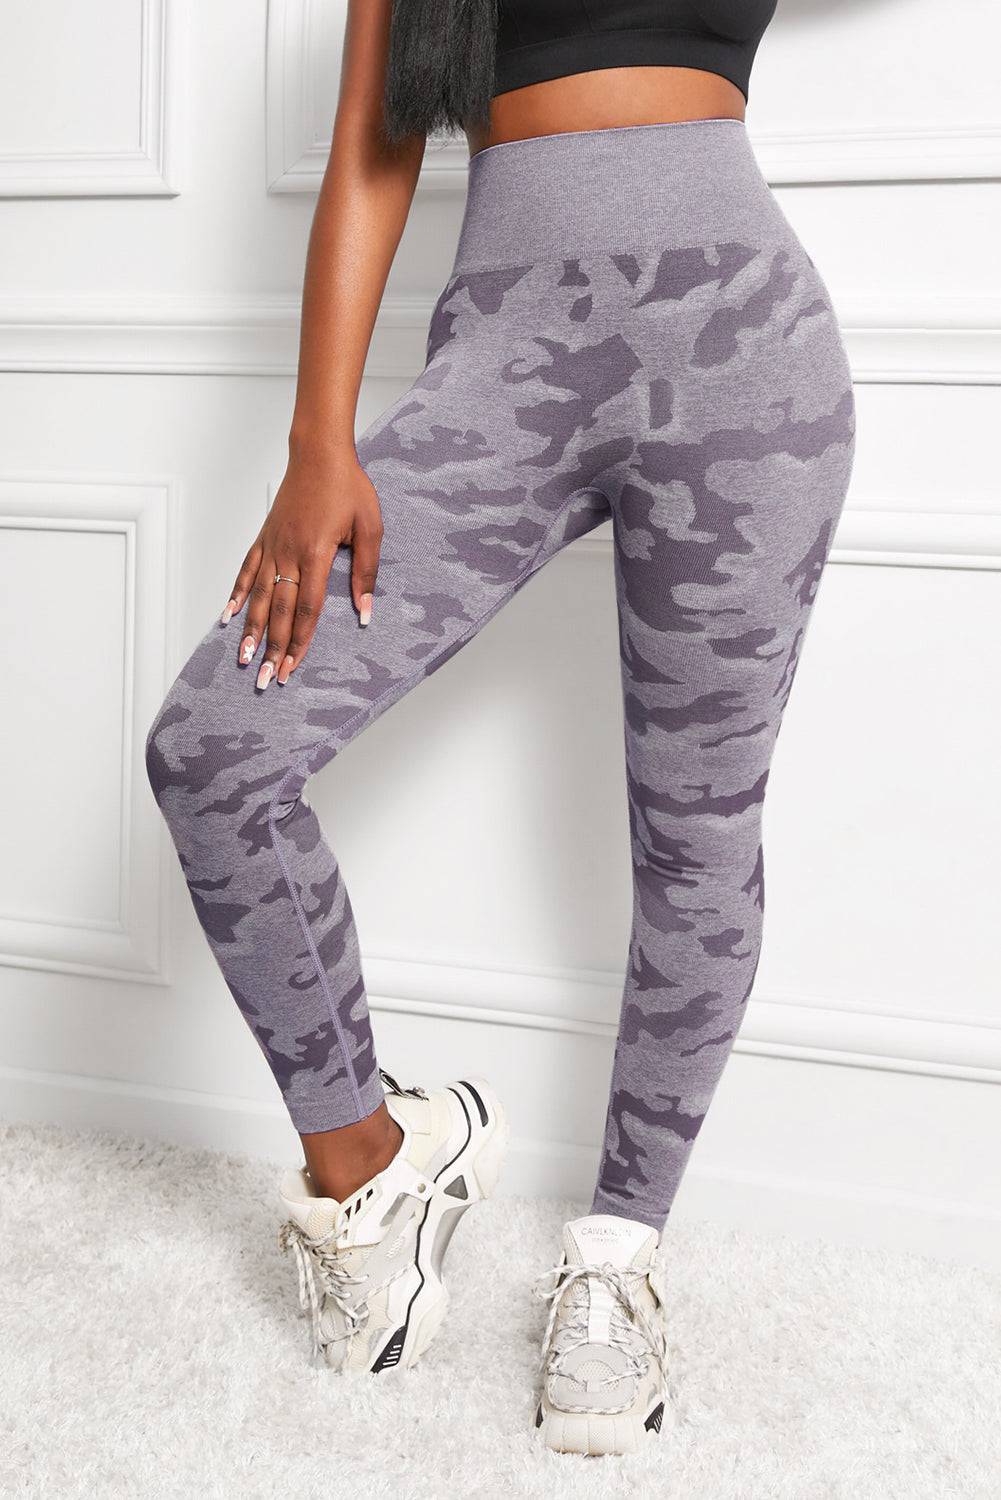 Camo Print Seamless High Waist Yoga Leggings - Embrace Your Curves with Romance and Comfort - Luxurious Material. - Guy Christopher